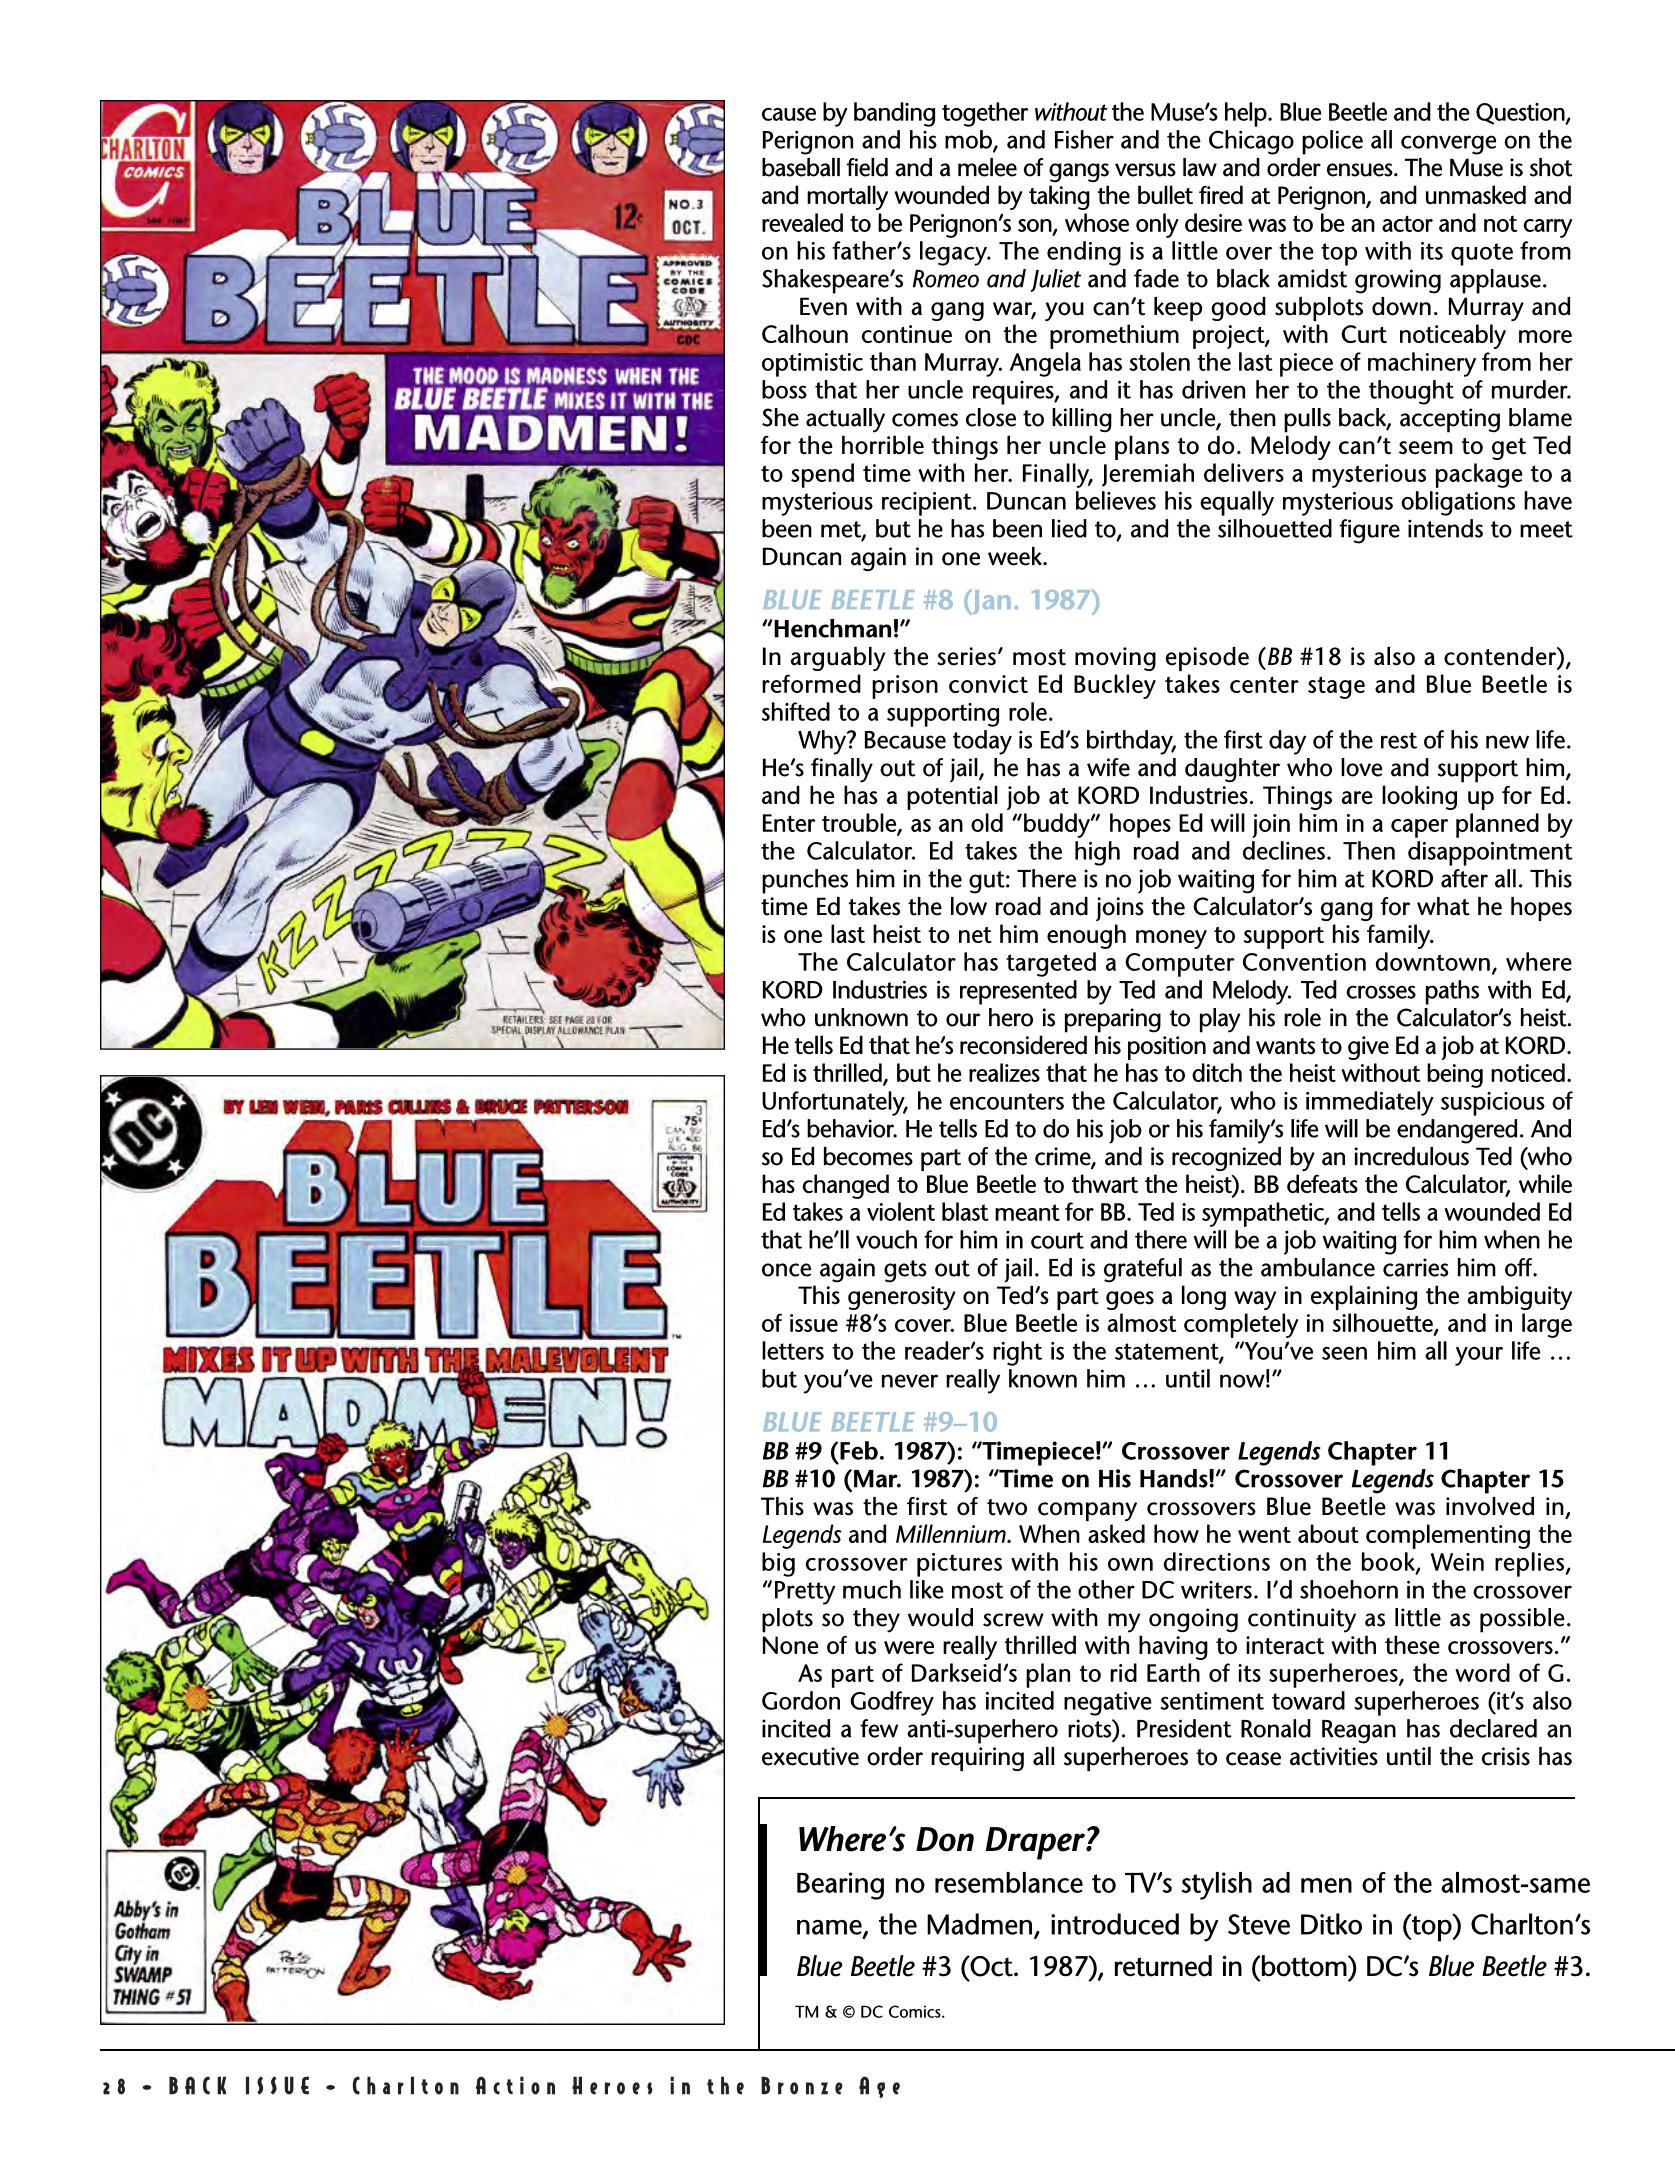 Read online Back Issue comic -  Issue #79 - 30